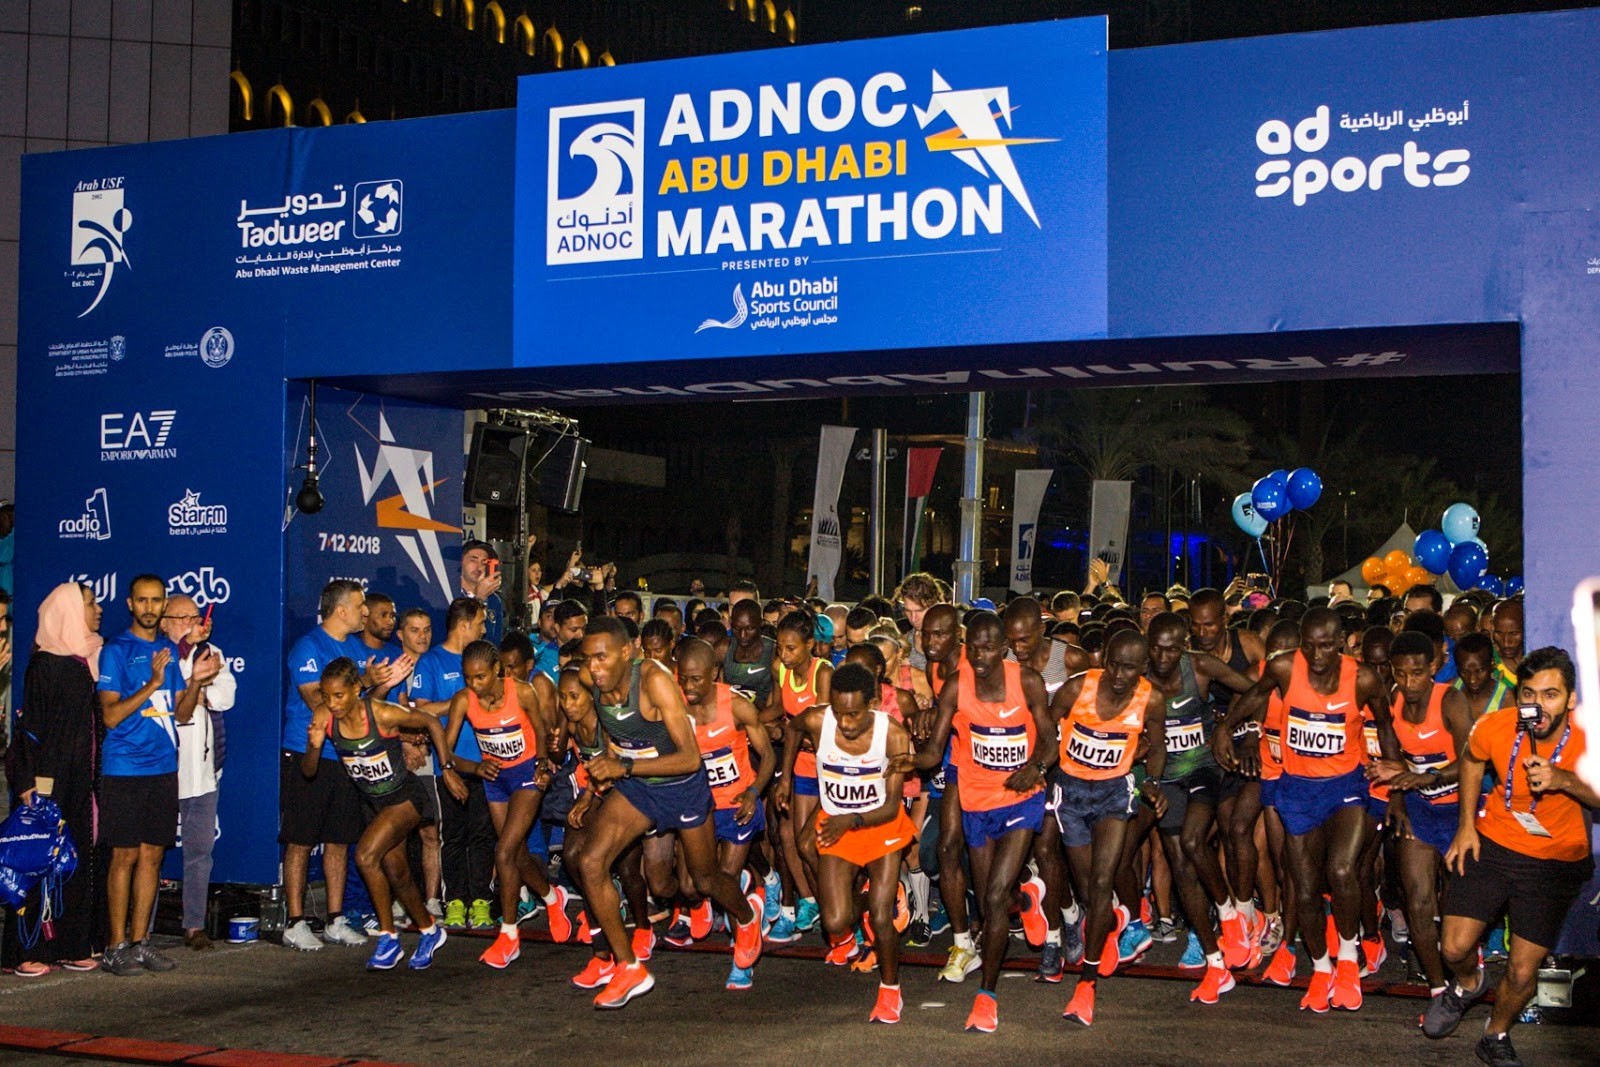 Registration is now open for third edition Of Adnoc Abu Dhabi Marathon in November